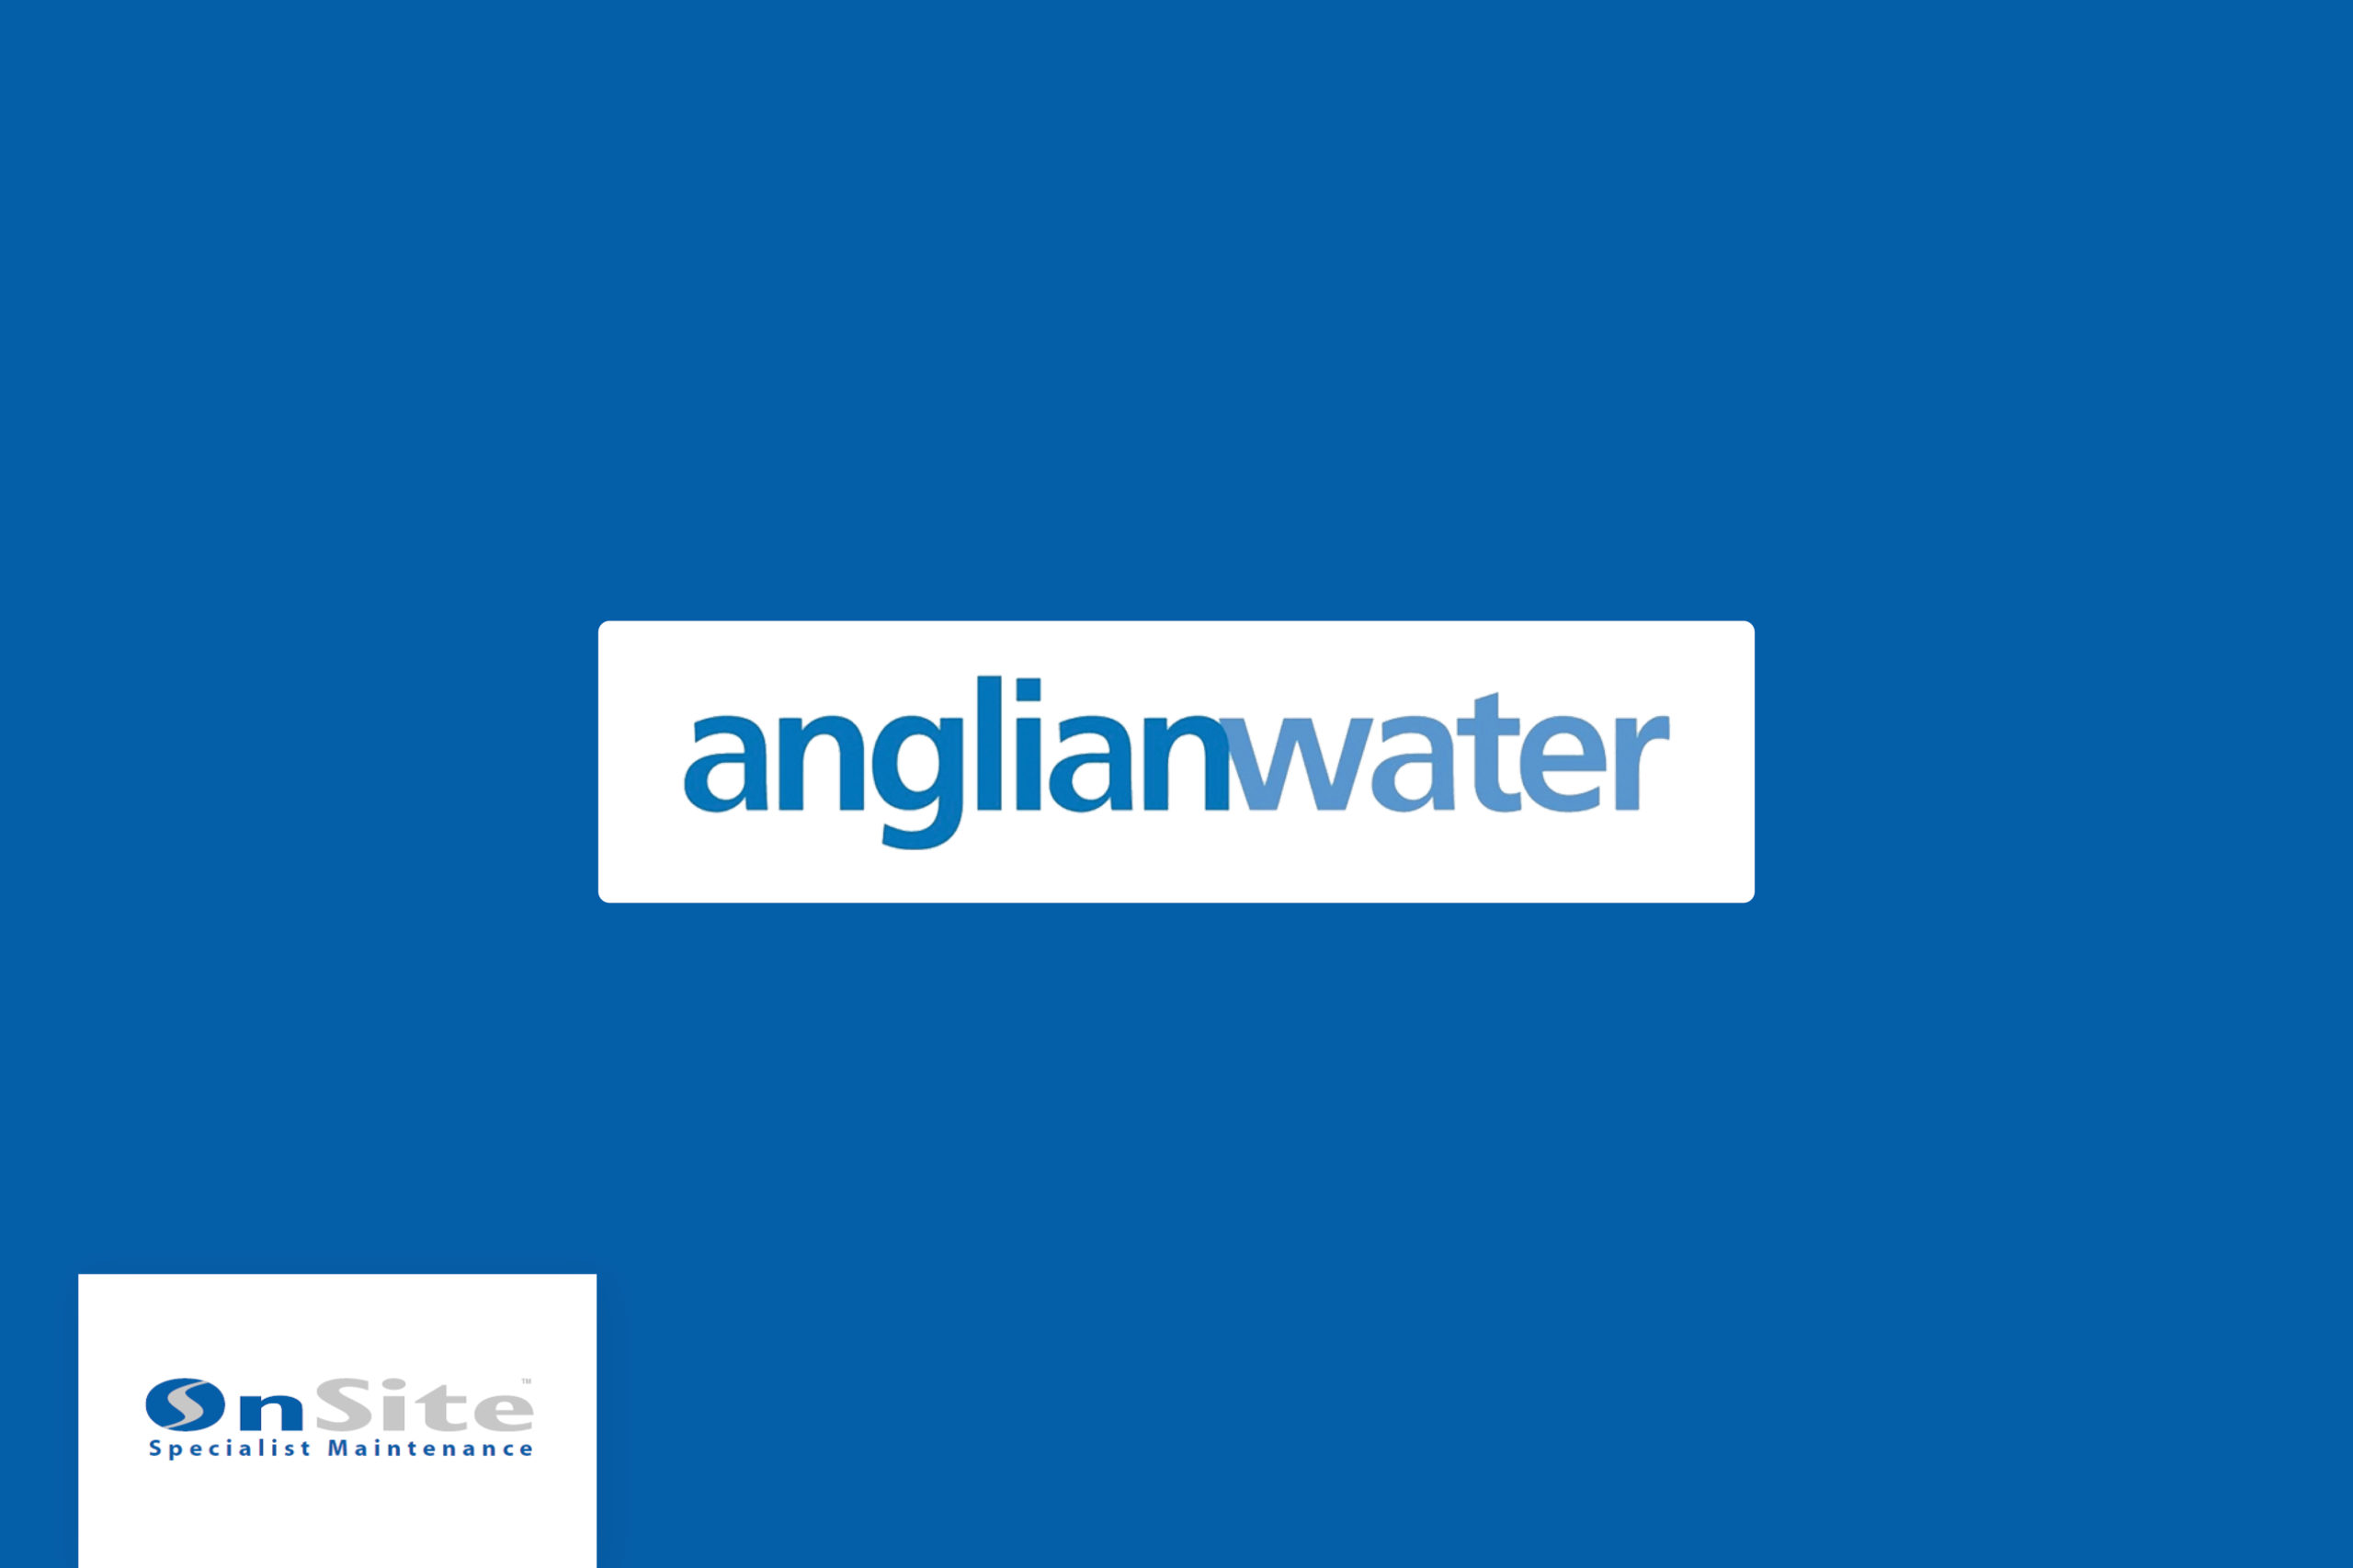 onsite-specialist-maintenance-wins-new-anglian-water-contract